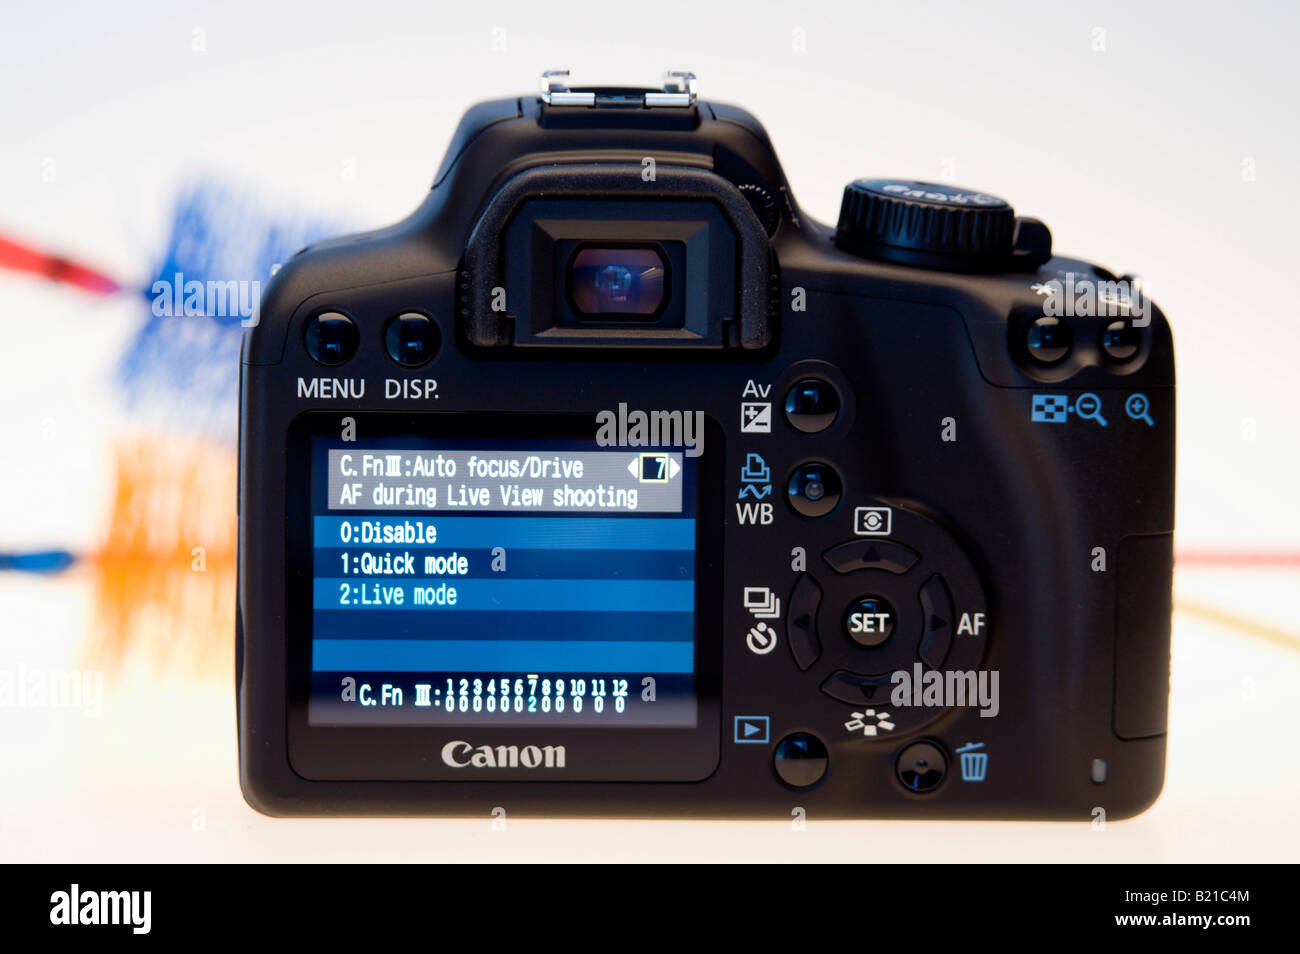 Canon EOS 1000D digital SLR camera July 2008 launch product shot Live View  function menu screen for setting live view options Stock Photo - Alamy